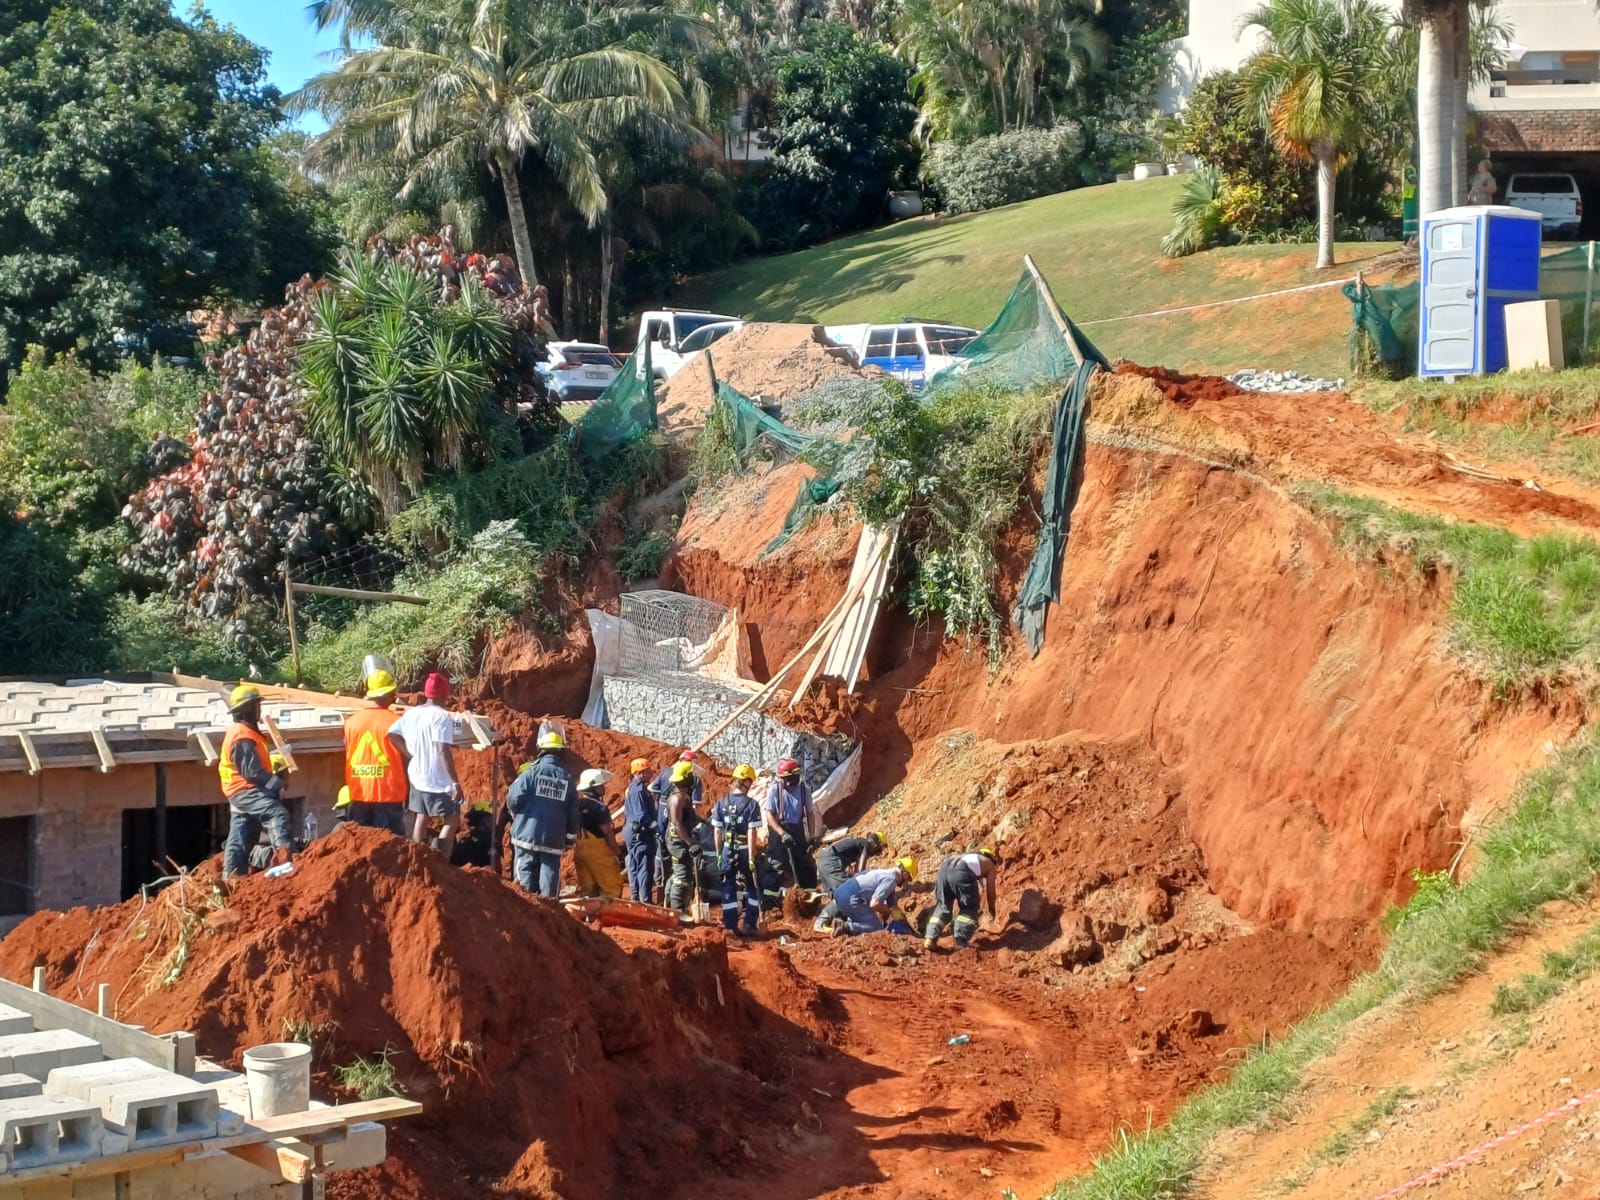 KZN police investigate cause of Ballito wall collapse at a construction site